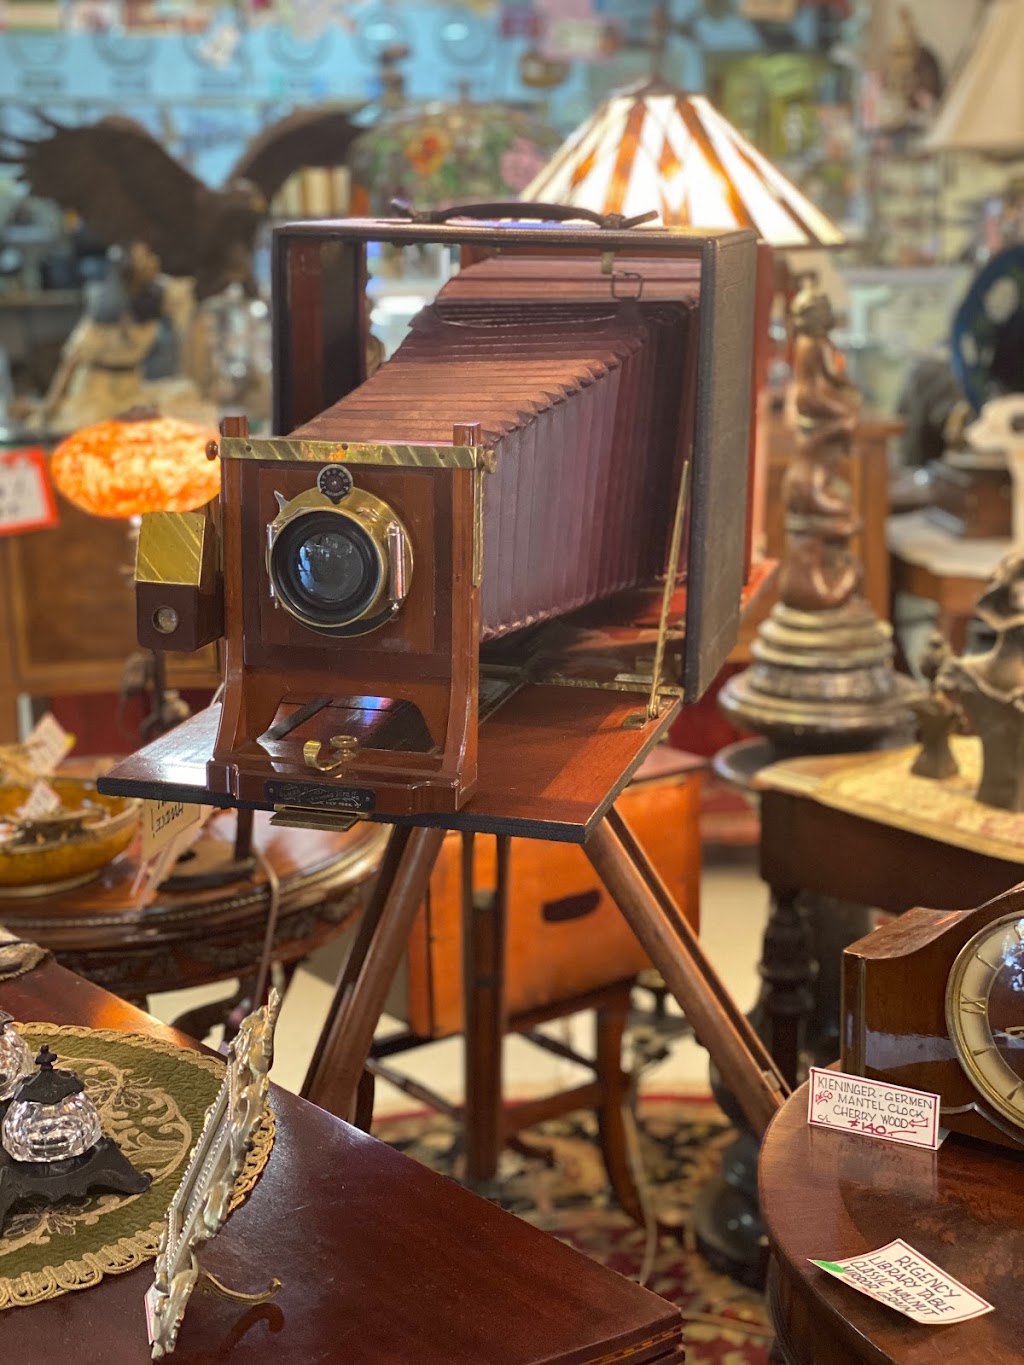 The Greenhouse Antiques And Collectibles | 425 N Country Rd, St James, NY 11780 | Phone: (631) 584-3758